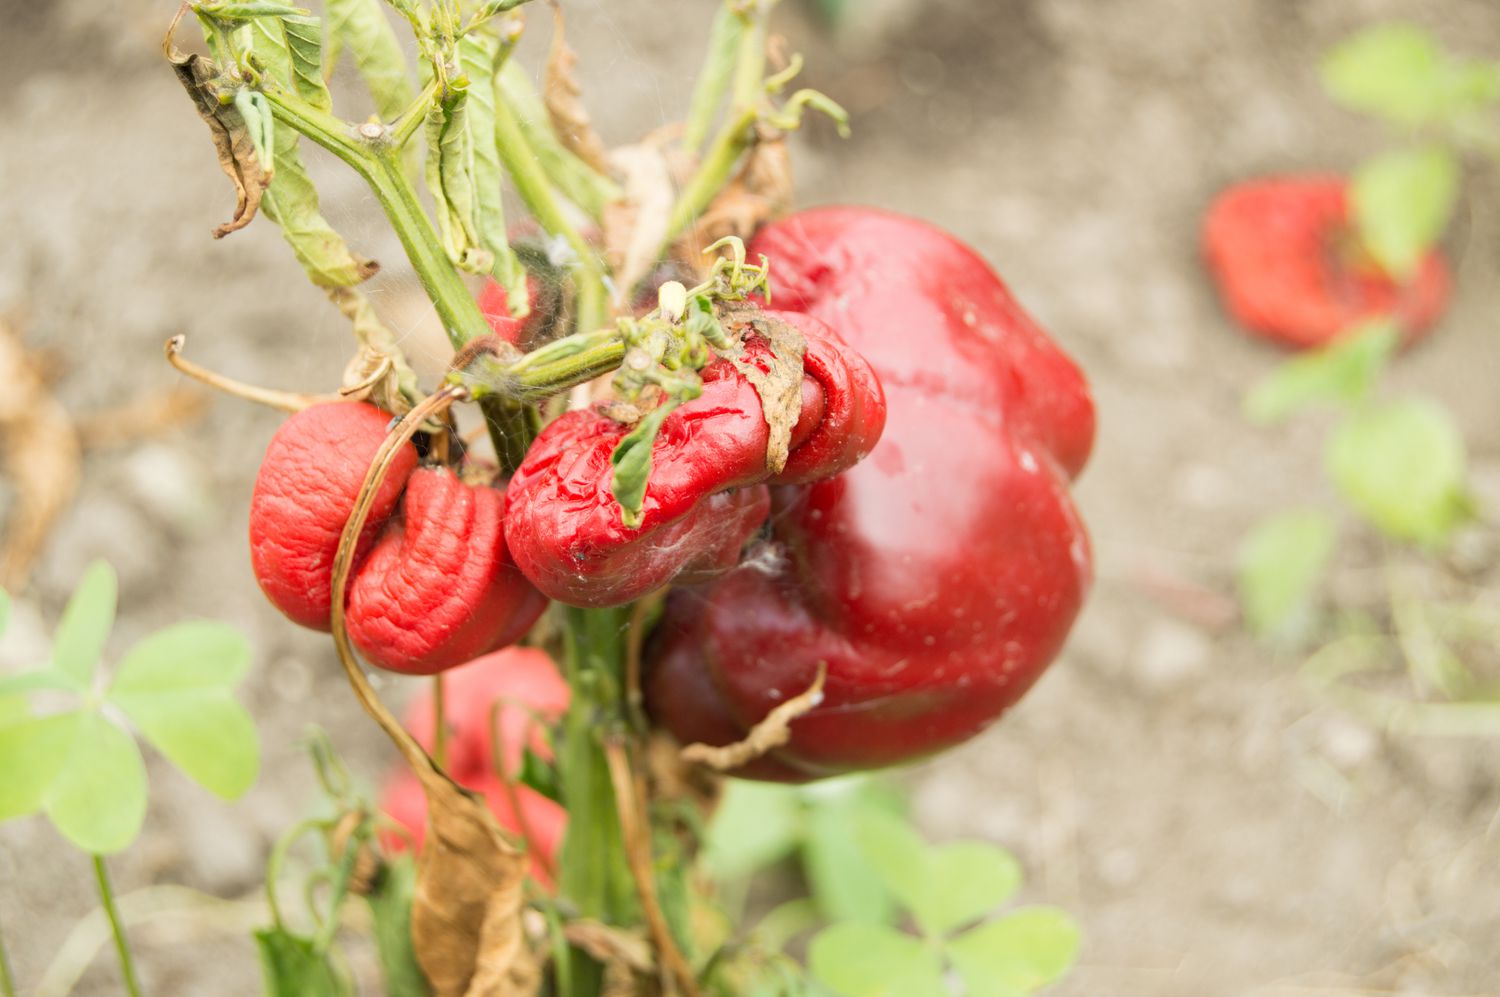 Red peppers shriveled during drought